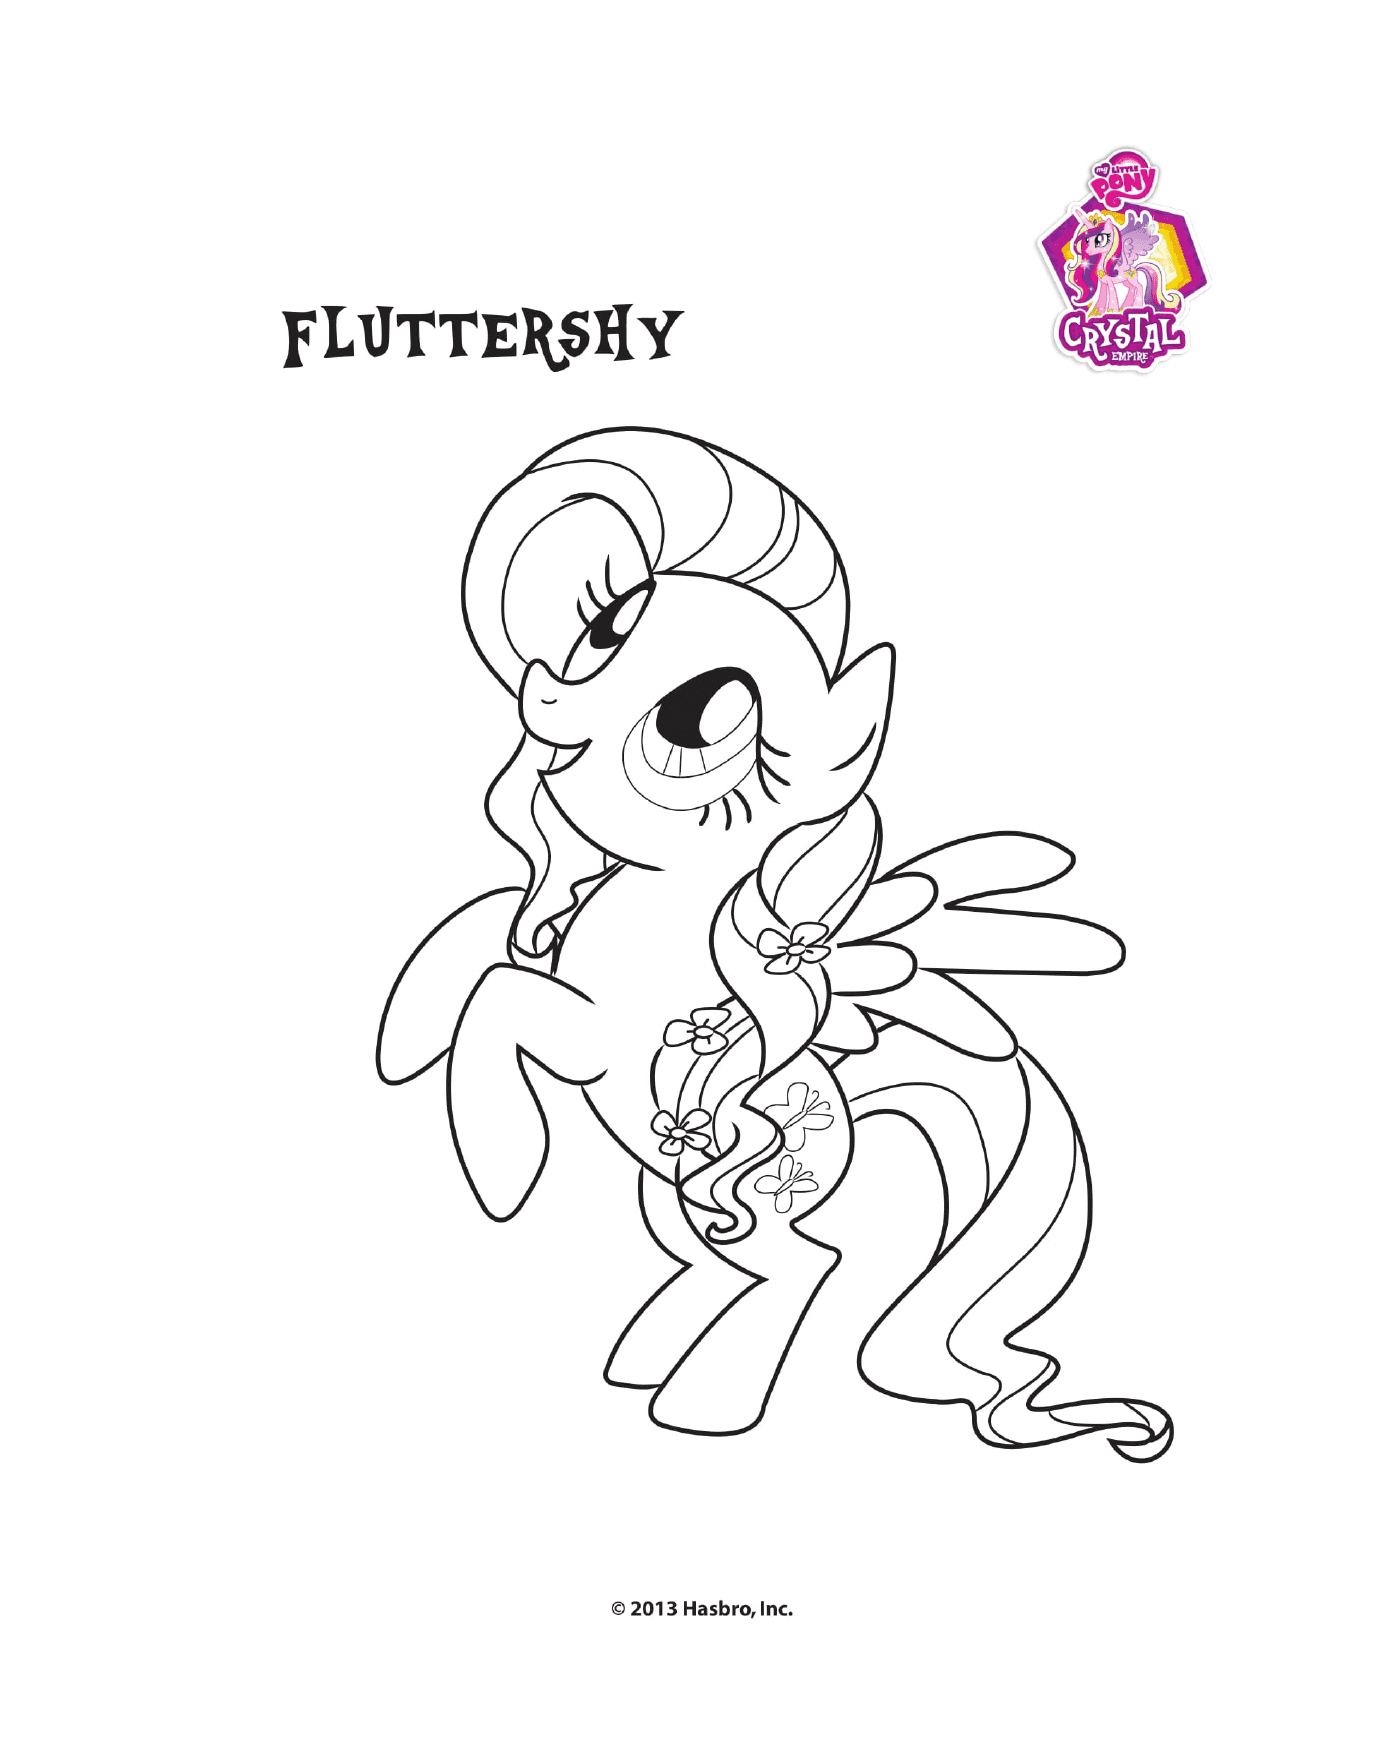  Fluttershy a Crystal Empire 